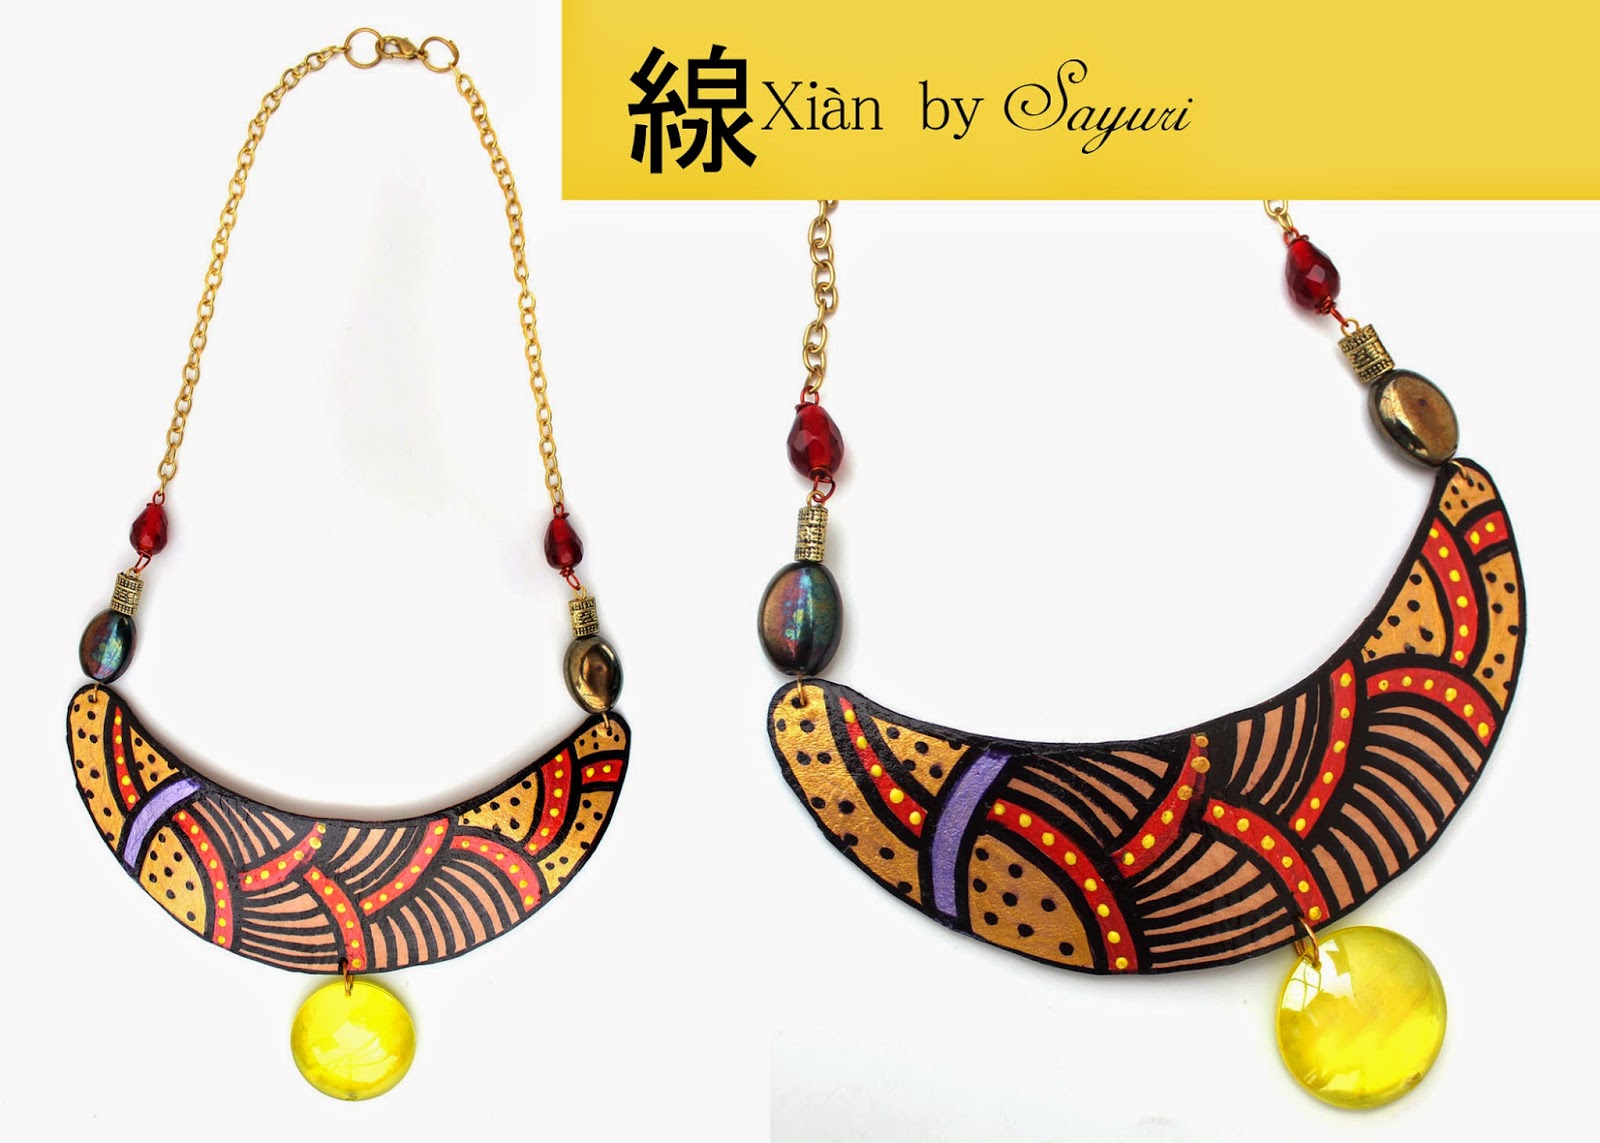 Xian - hand painted leather necklaces - Sayuri